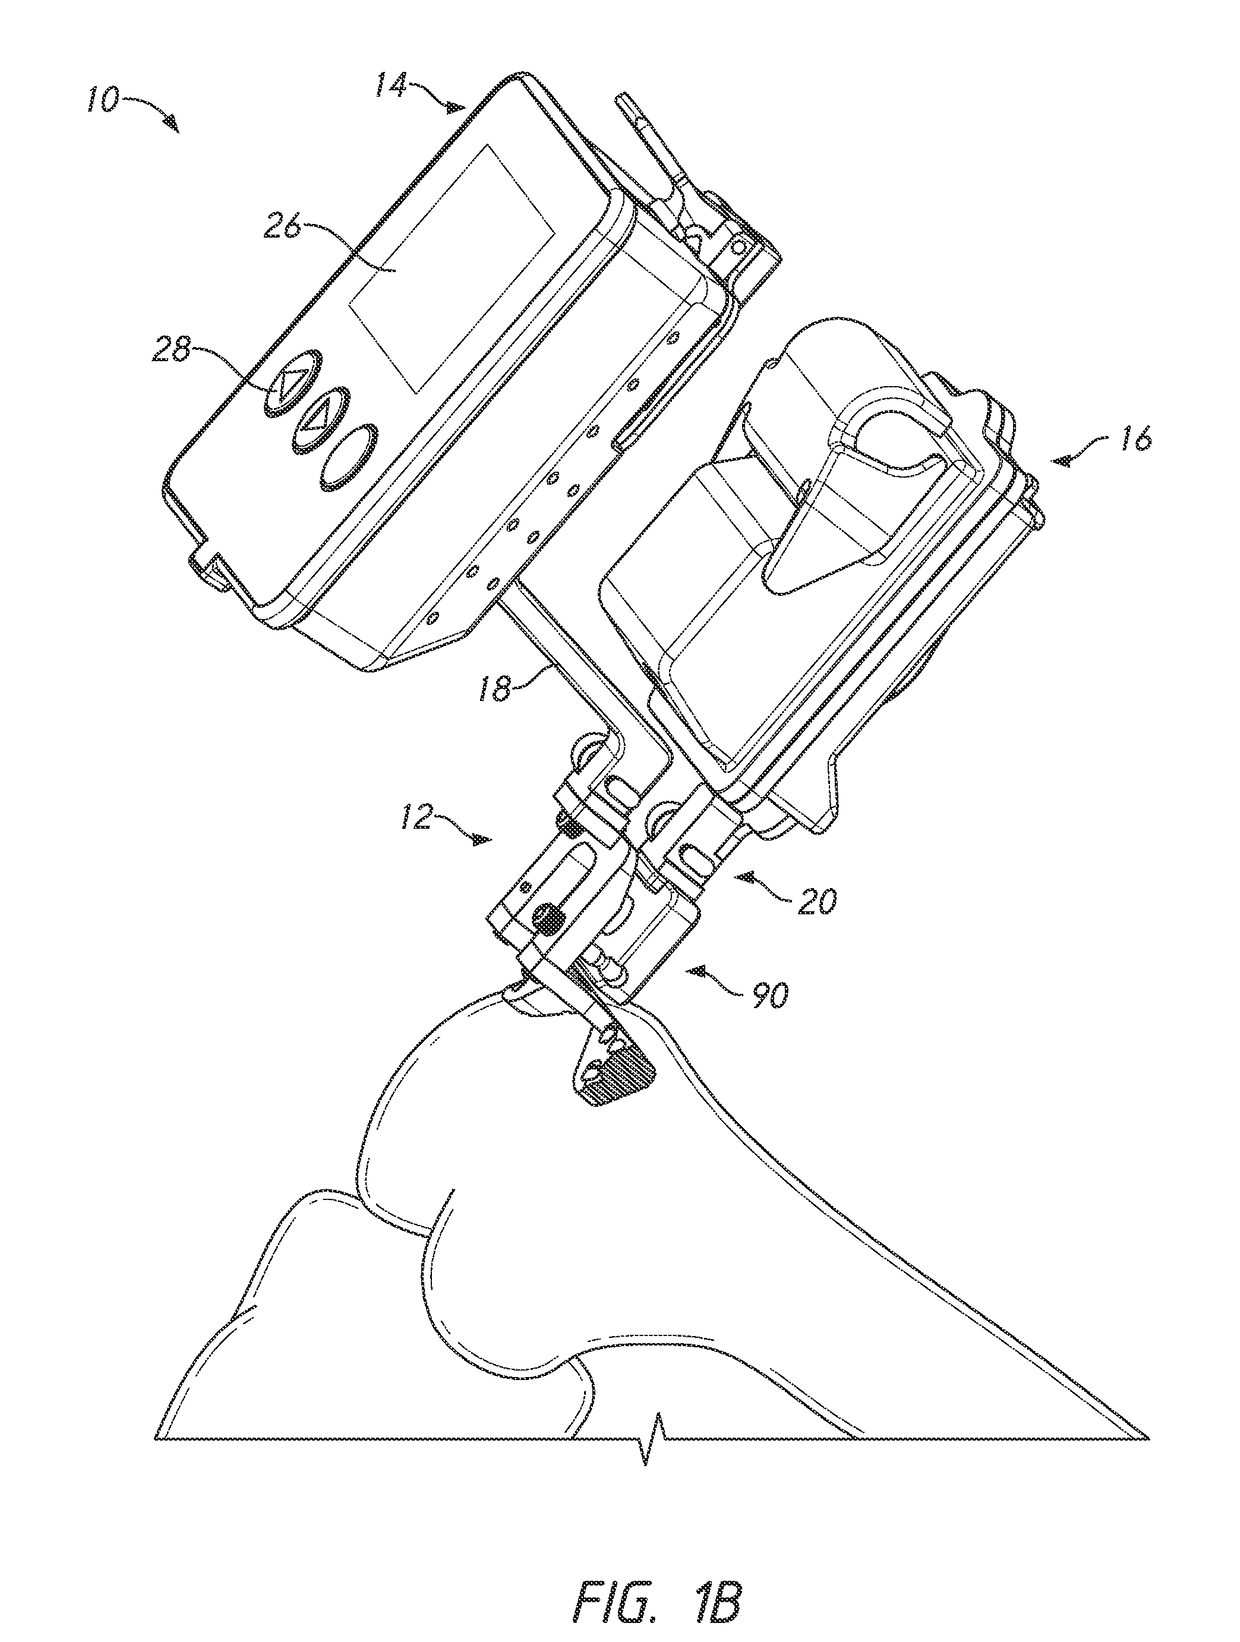 Soft tissue measurement & balancing systems and methods